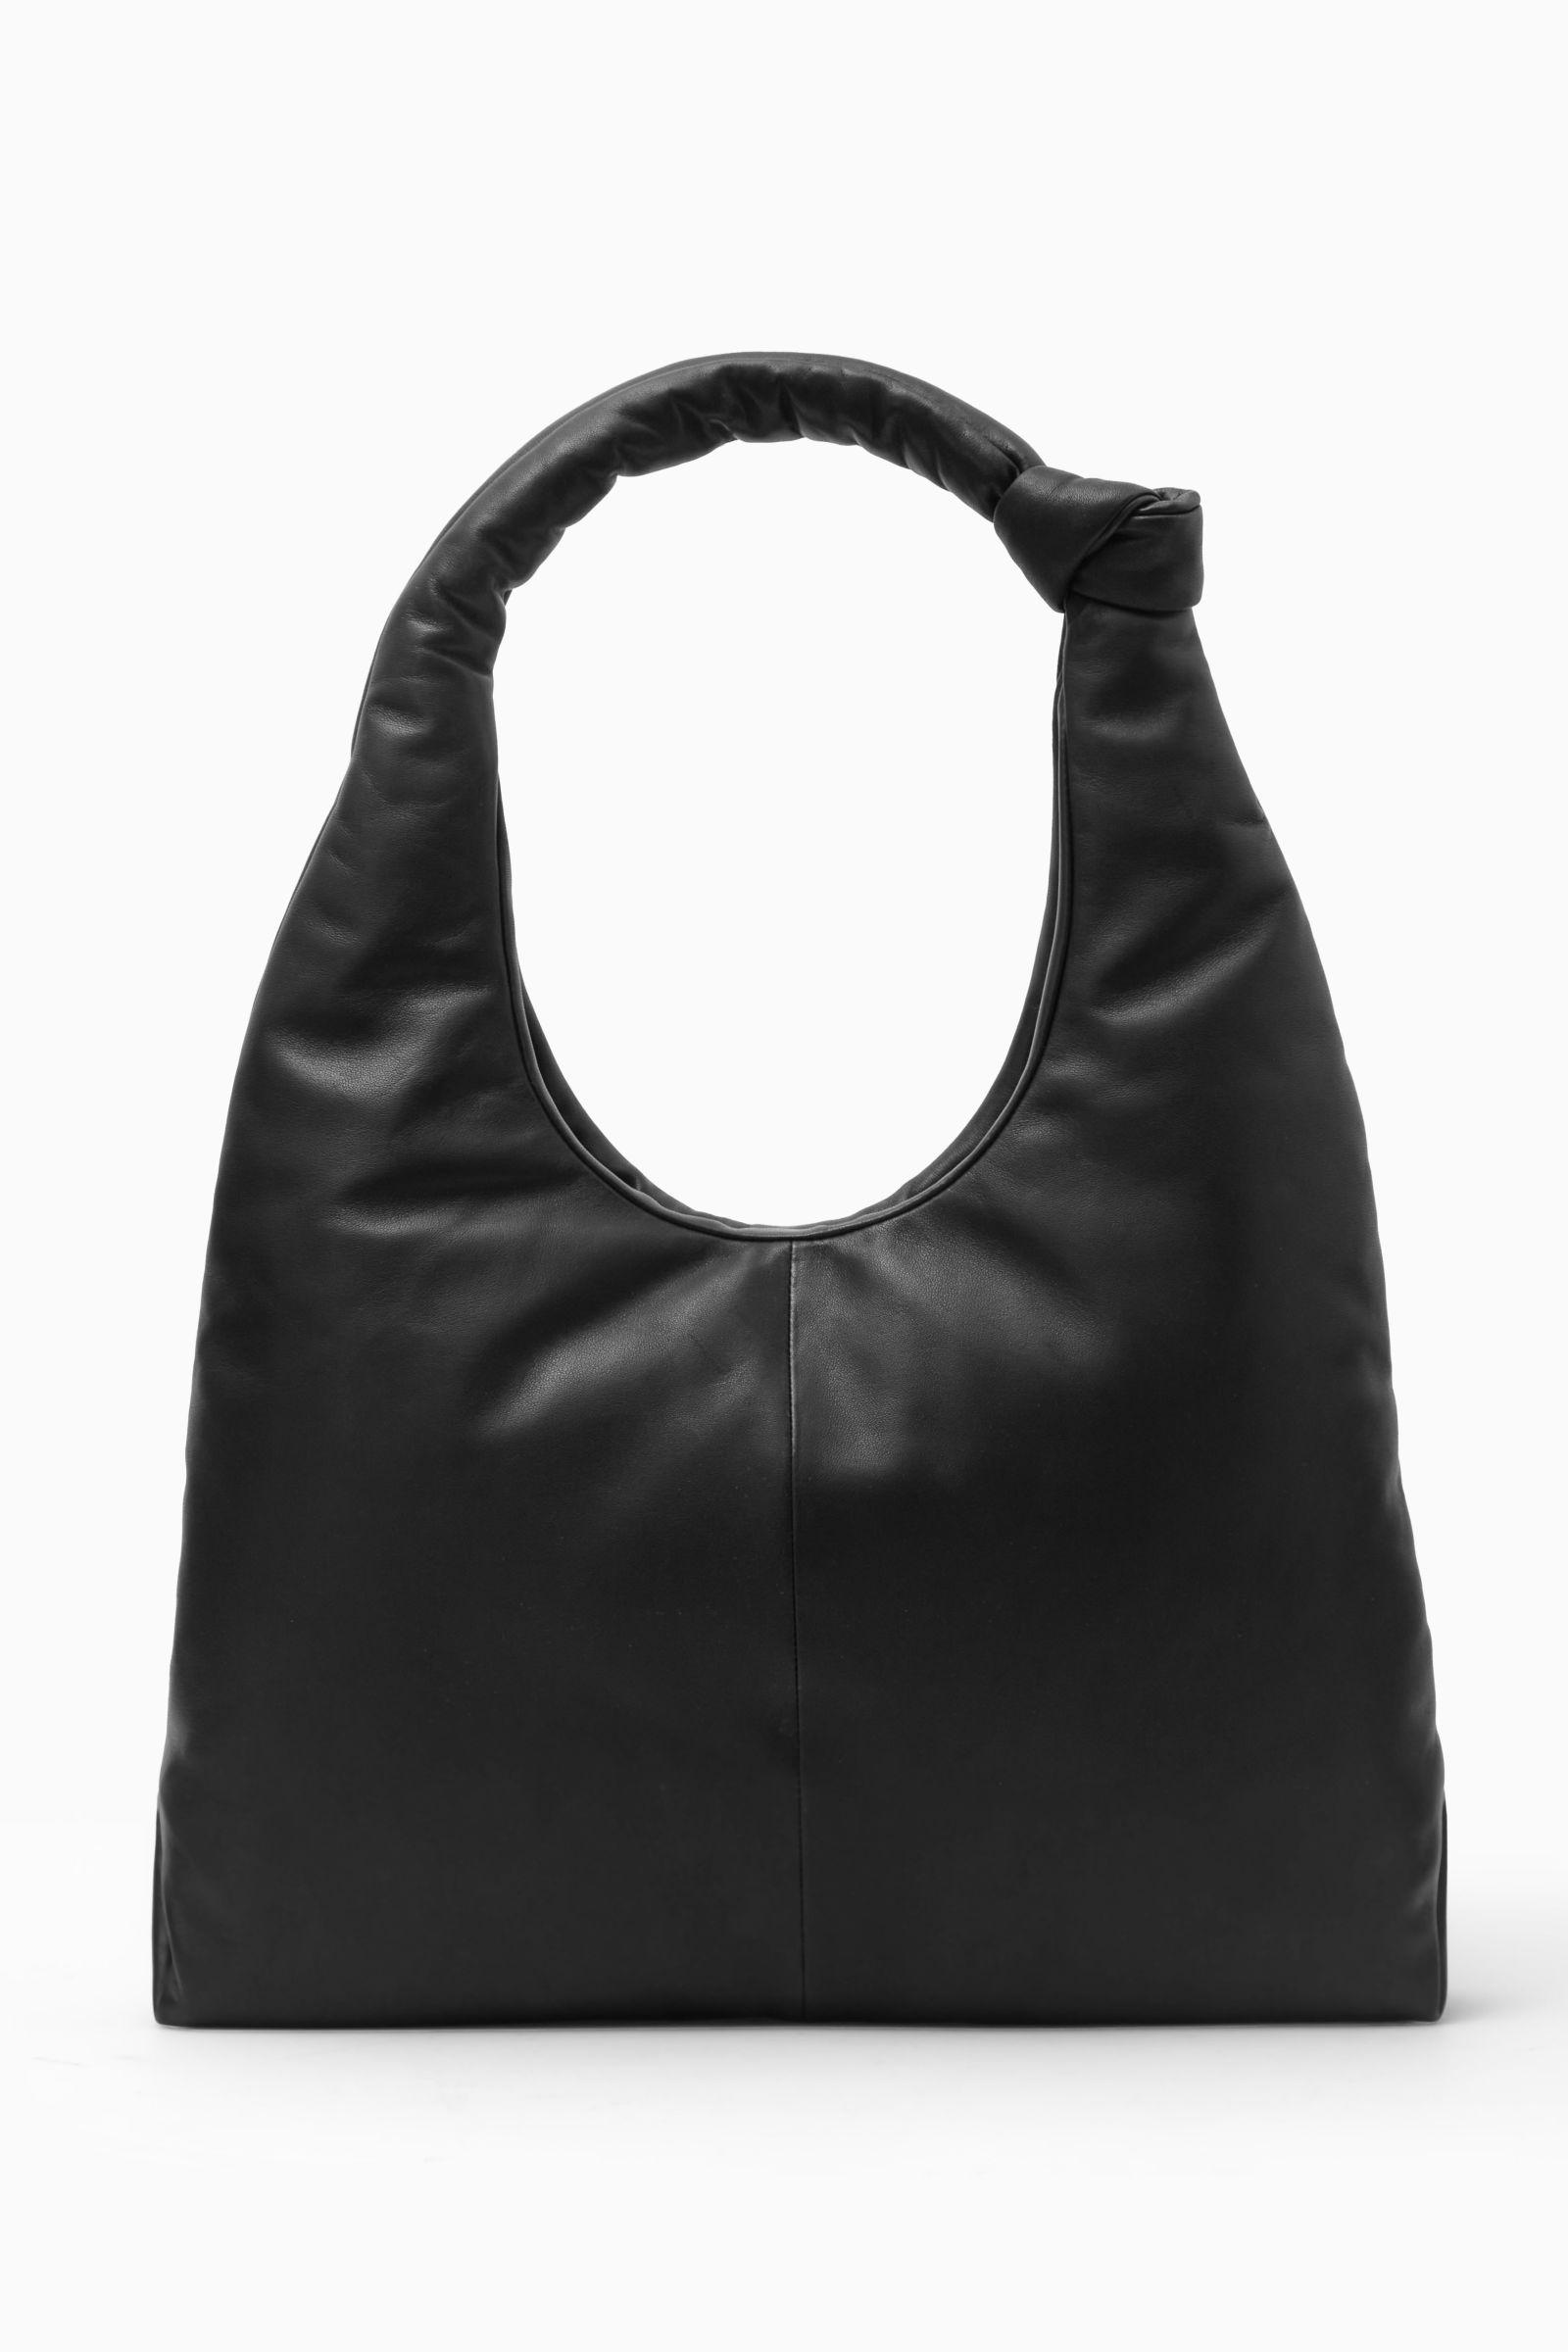 COS Knotted Padded Shoulder Bag - Leather in Black | Lyst UK